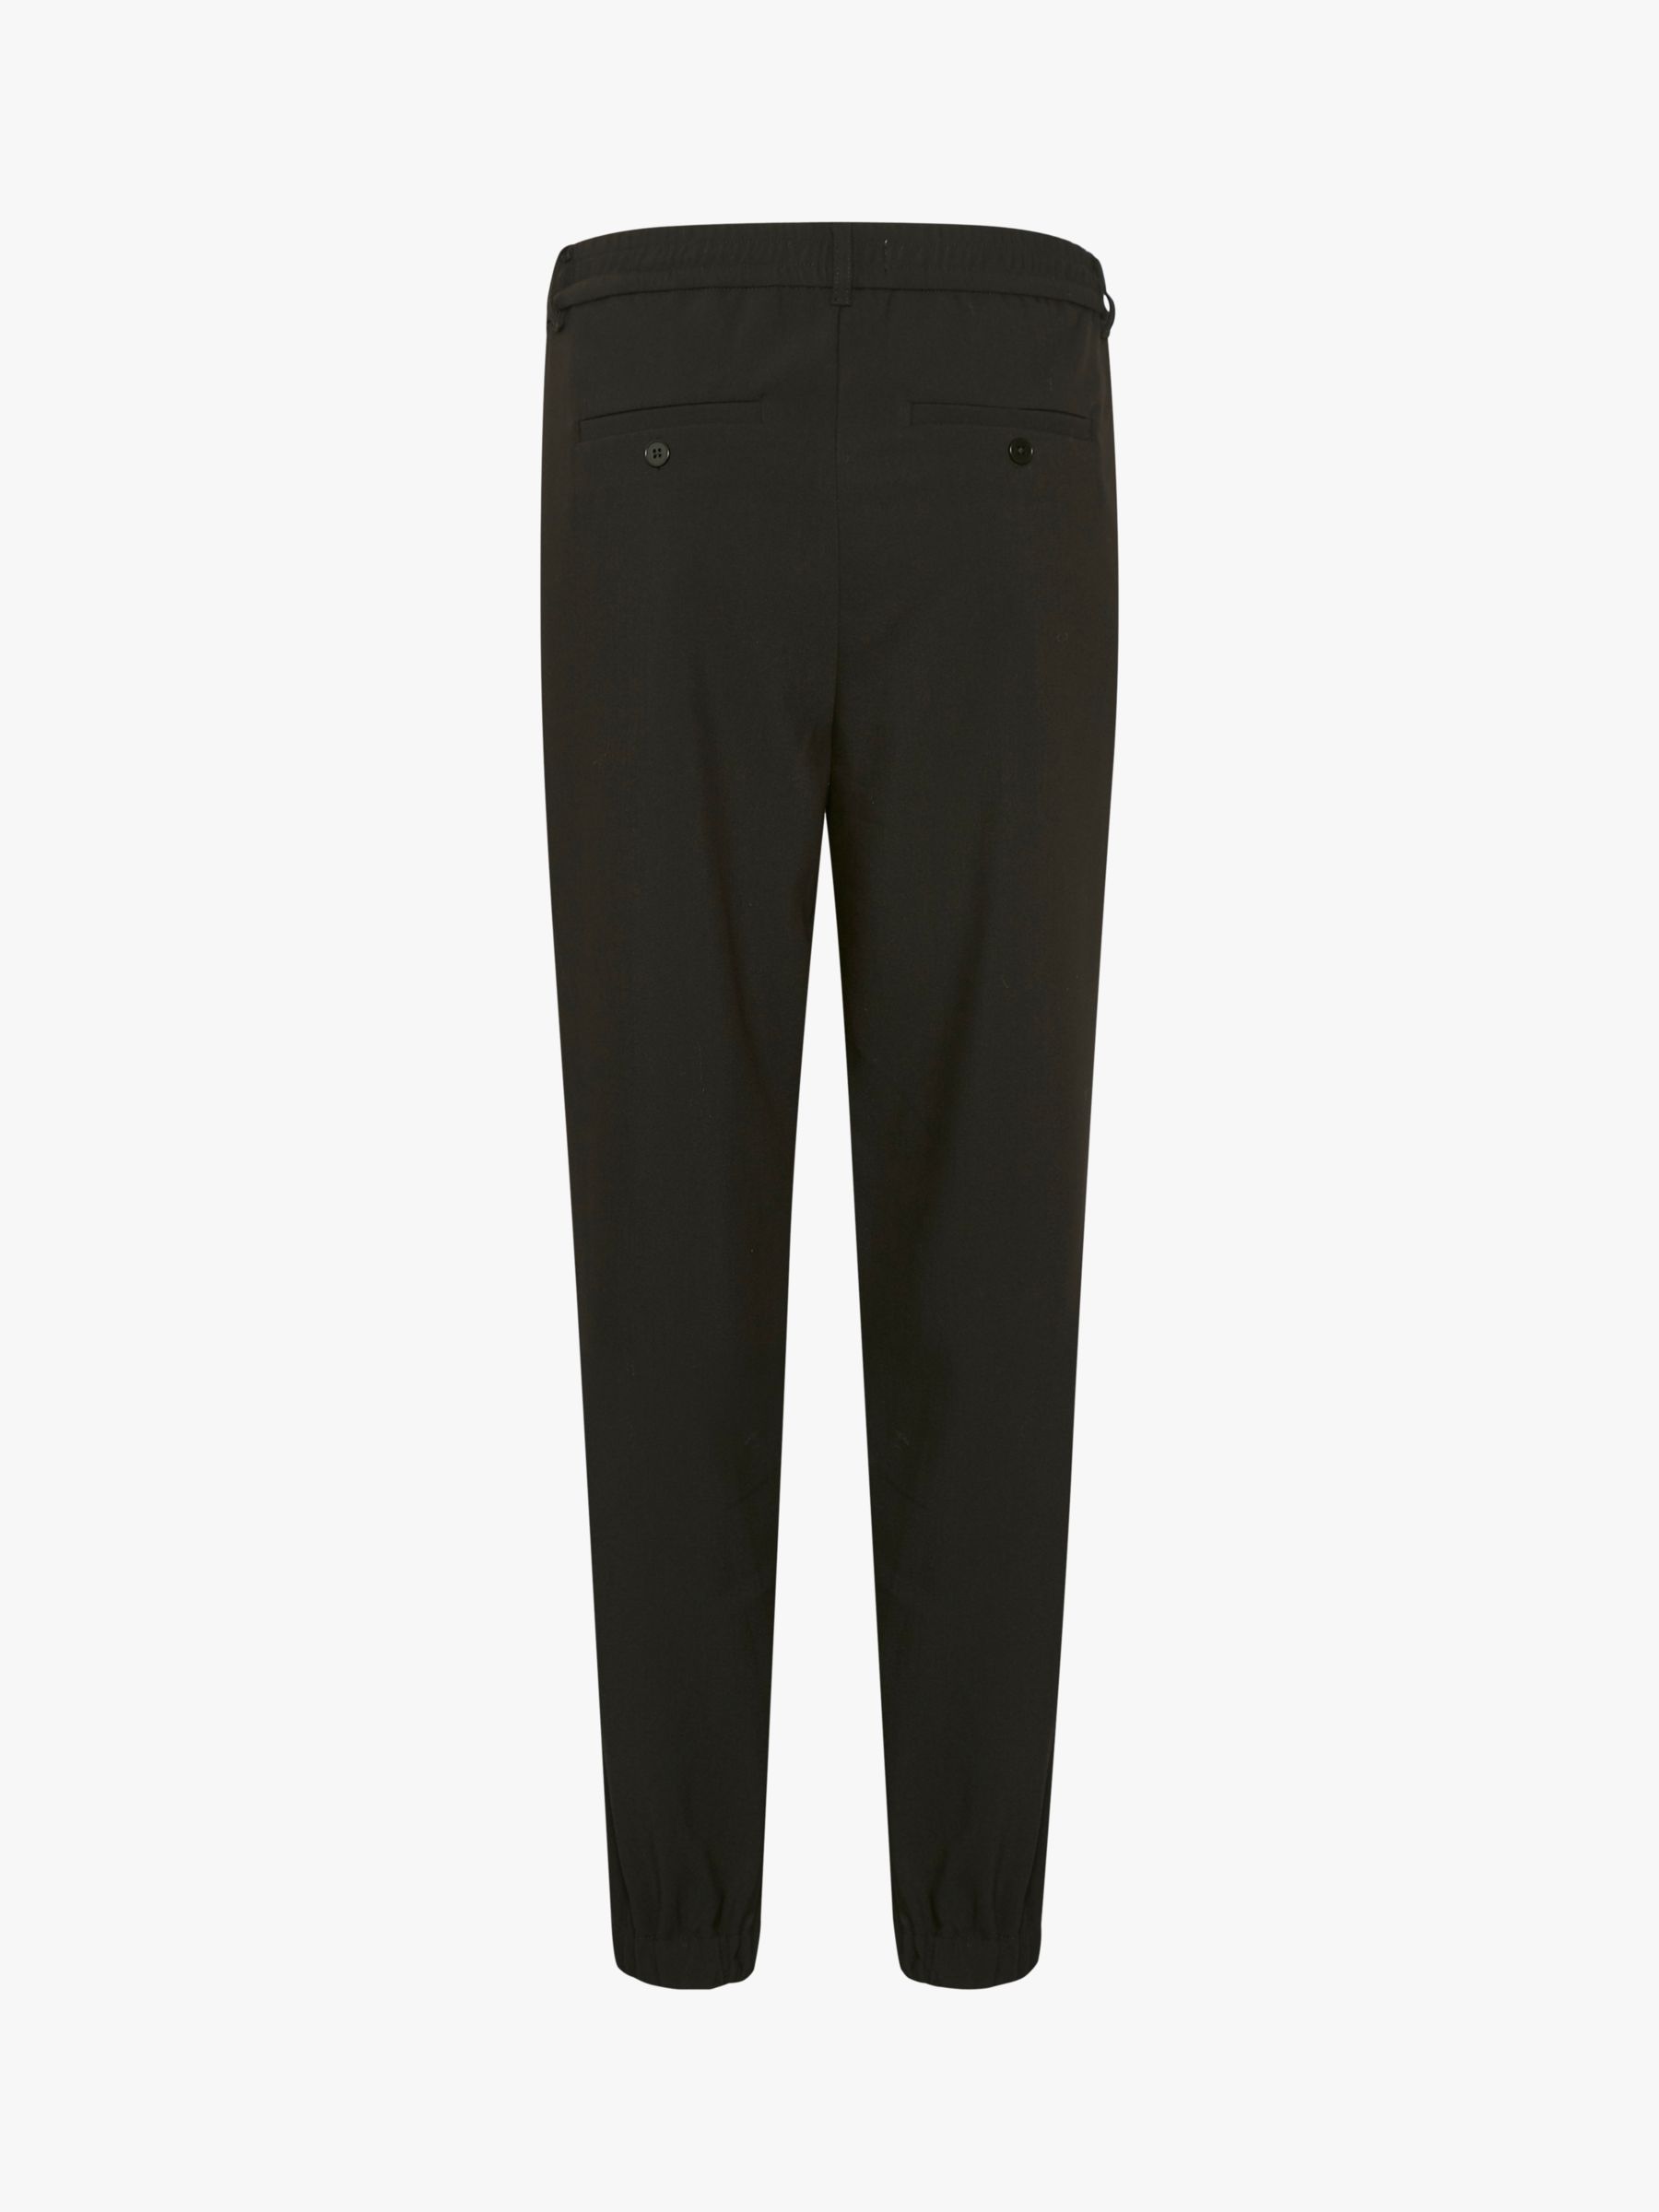 Buy Part Two Katja Tapered Trousers, Black Online at johnlewis.com